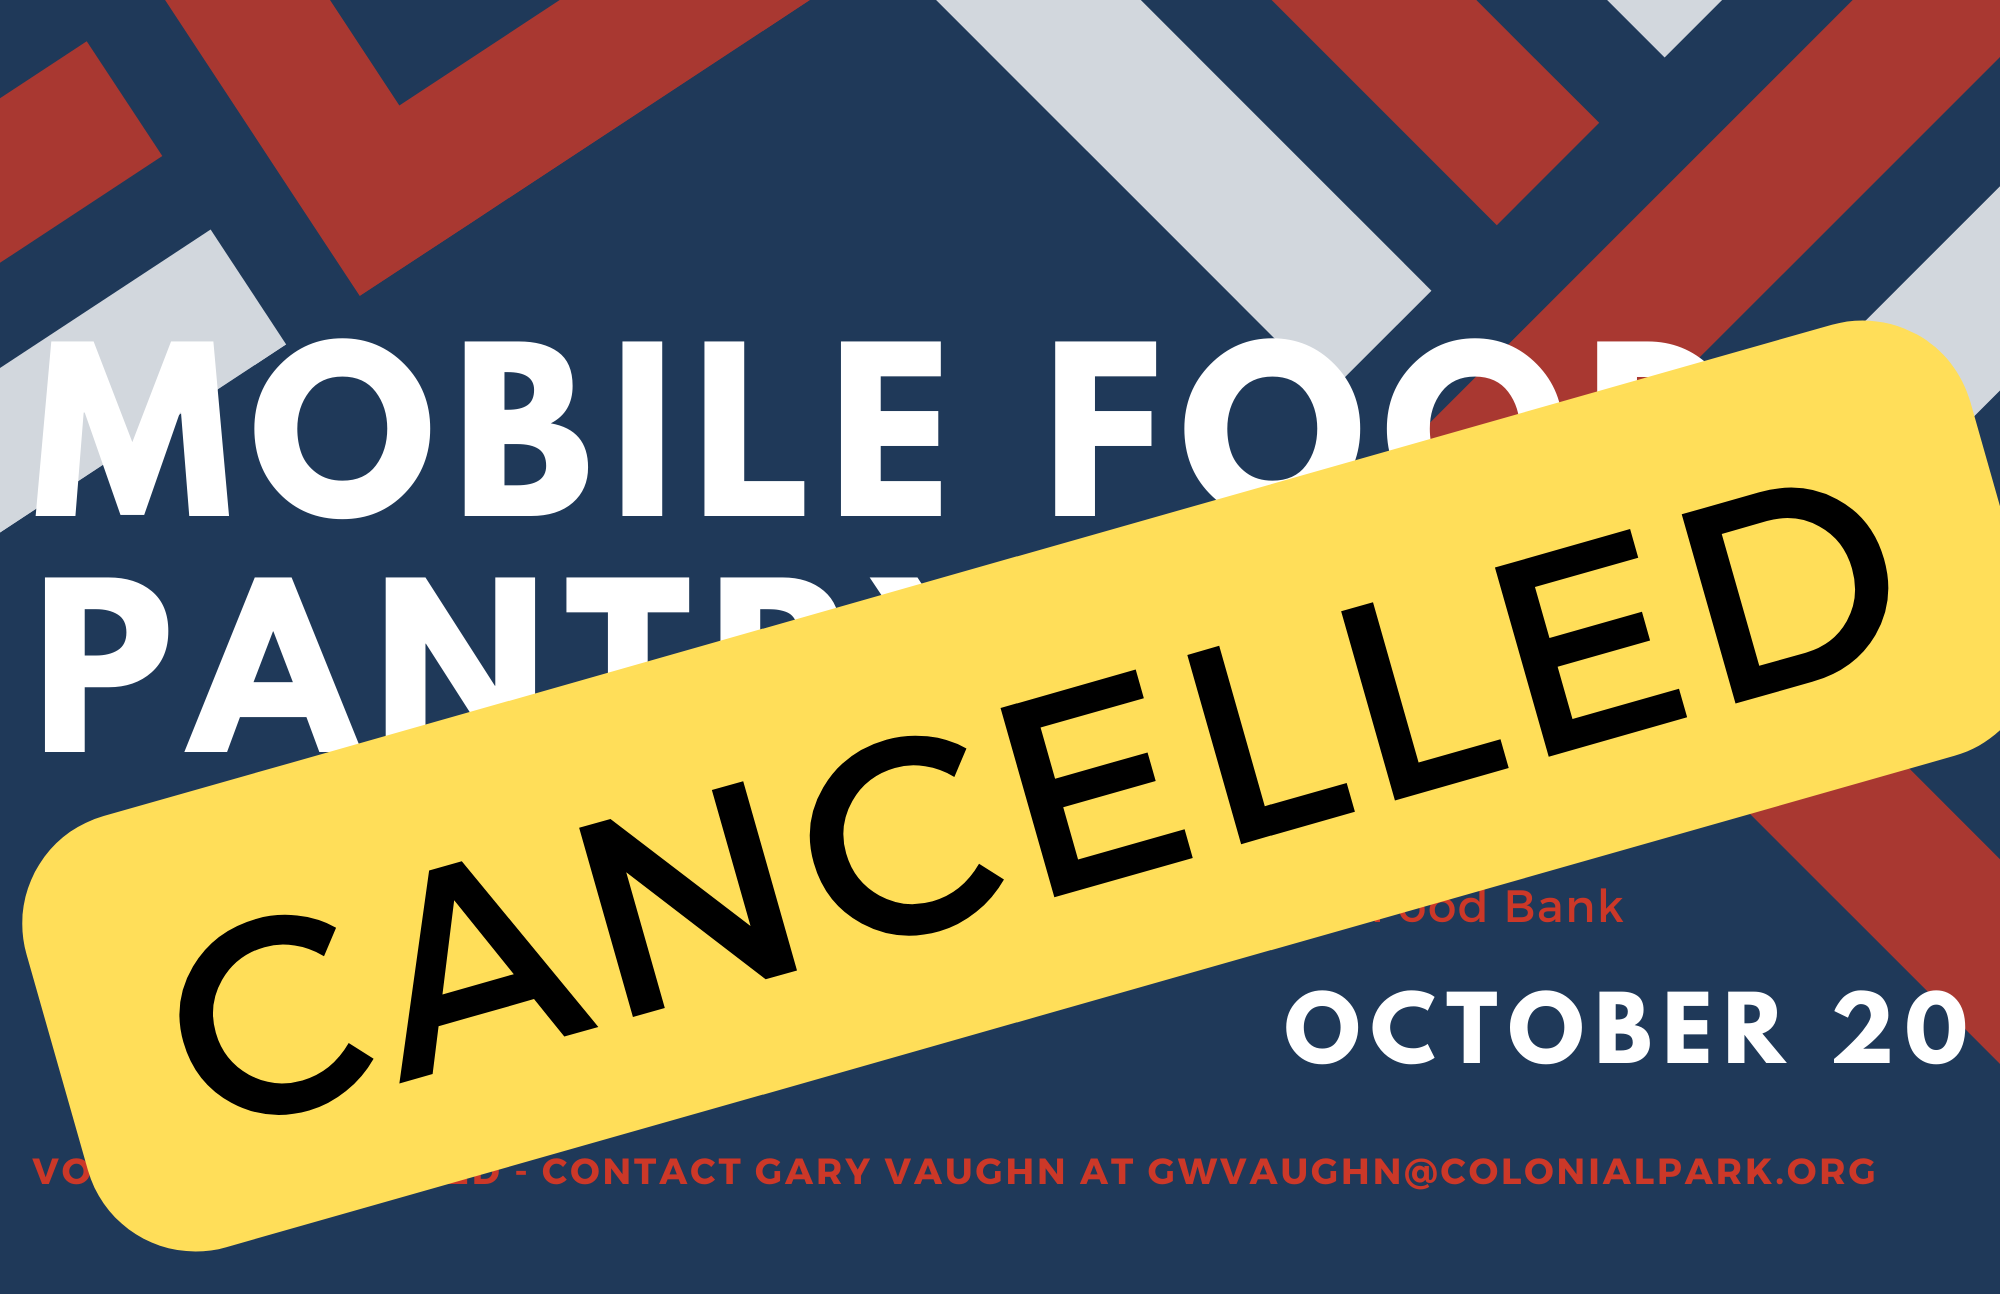 MOBILE FOOD PANTRY CANCELLED OCTOBER 20 Colonial Park UMC